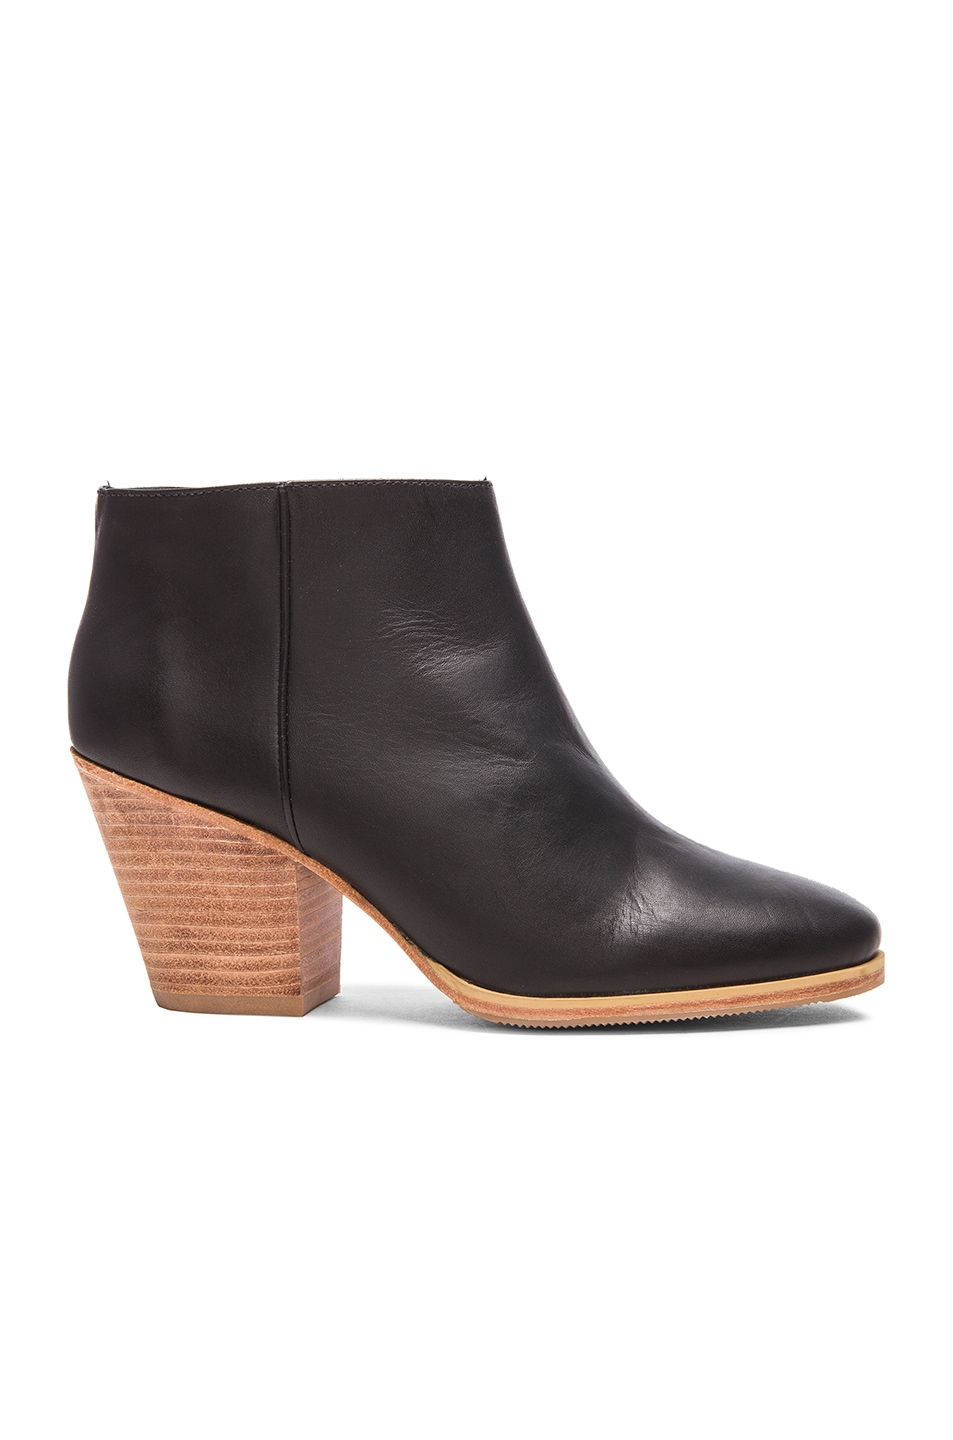 Image 1 of Rachel Comey Mars Leather Booties in Black & Natural